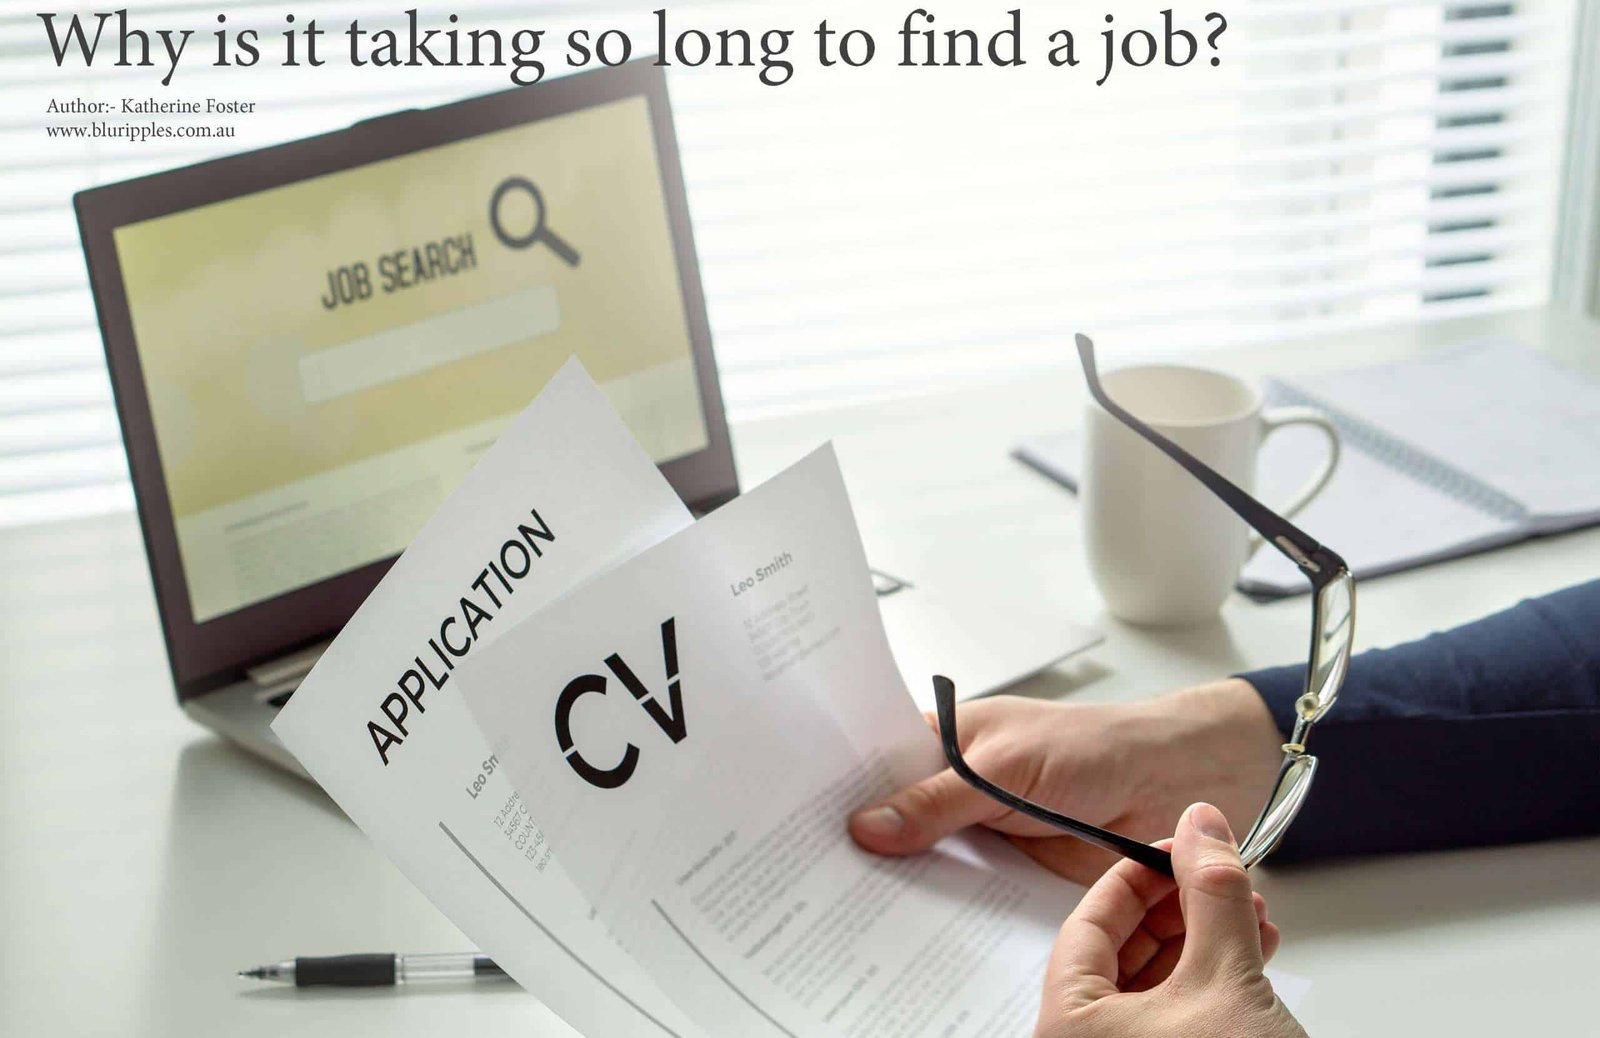 Job Search - Why is it taking so long to find a job